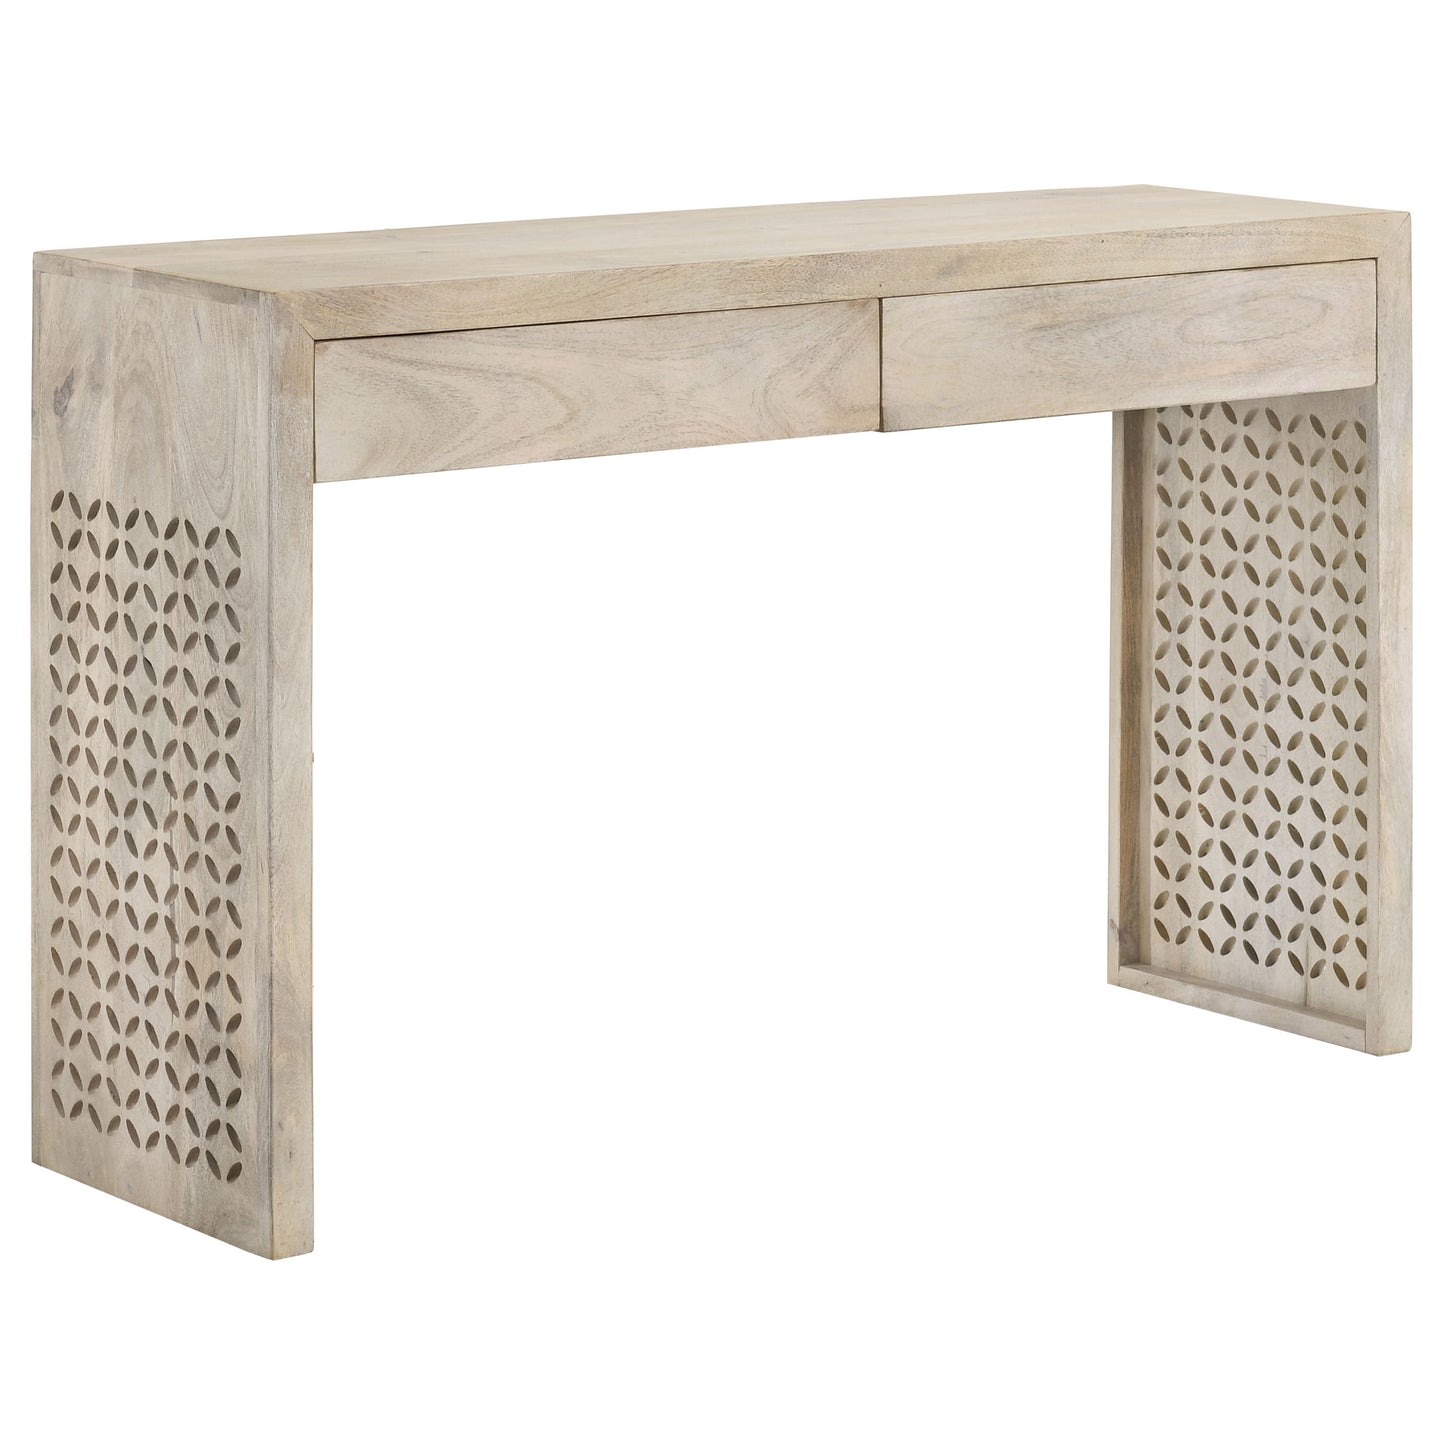 Rickman Rectangular 2-drawer Console Table White Washed